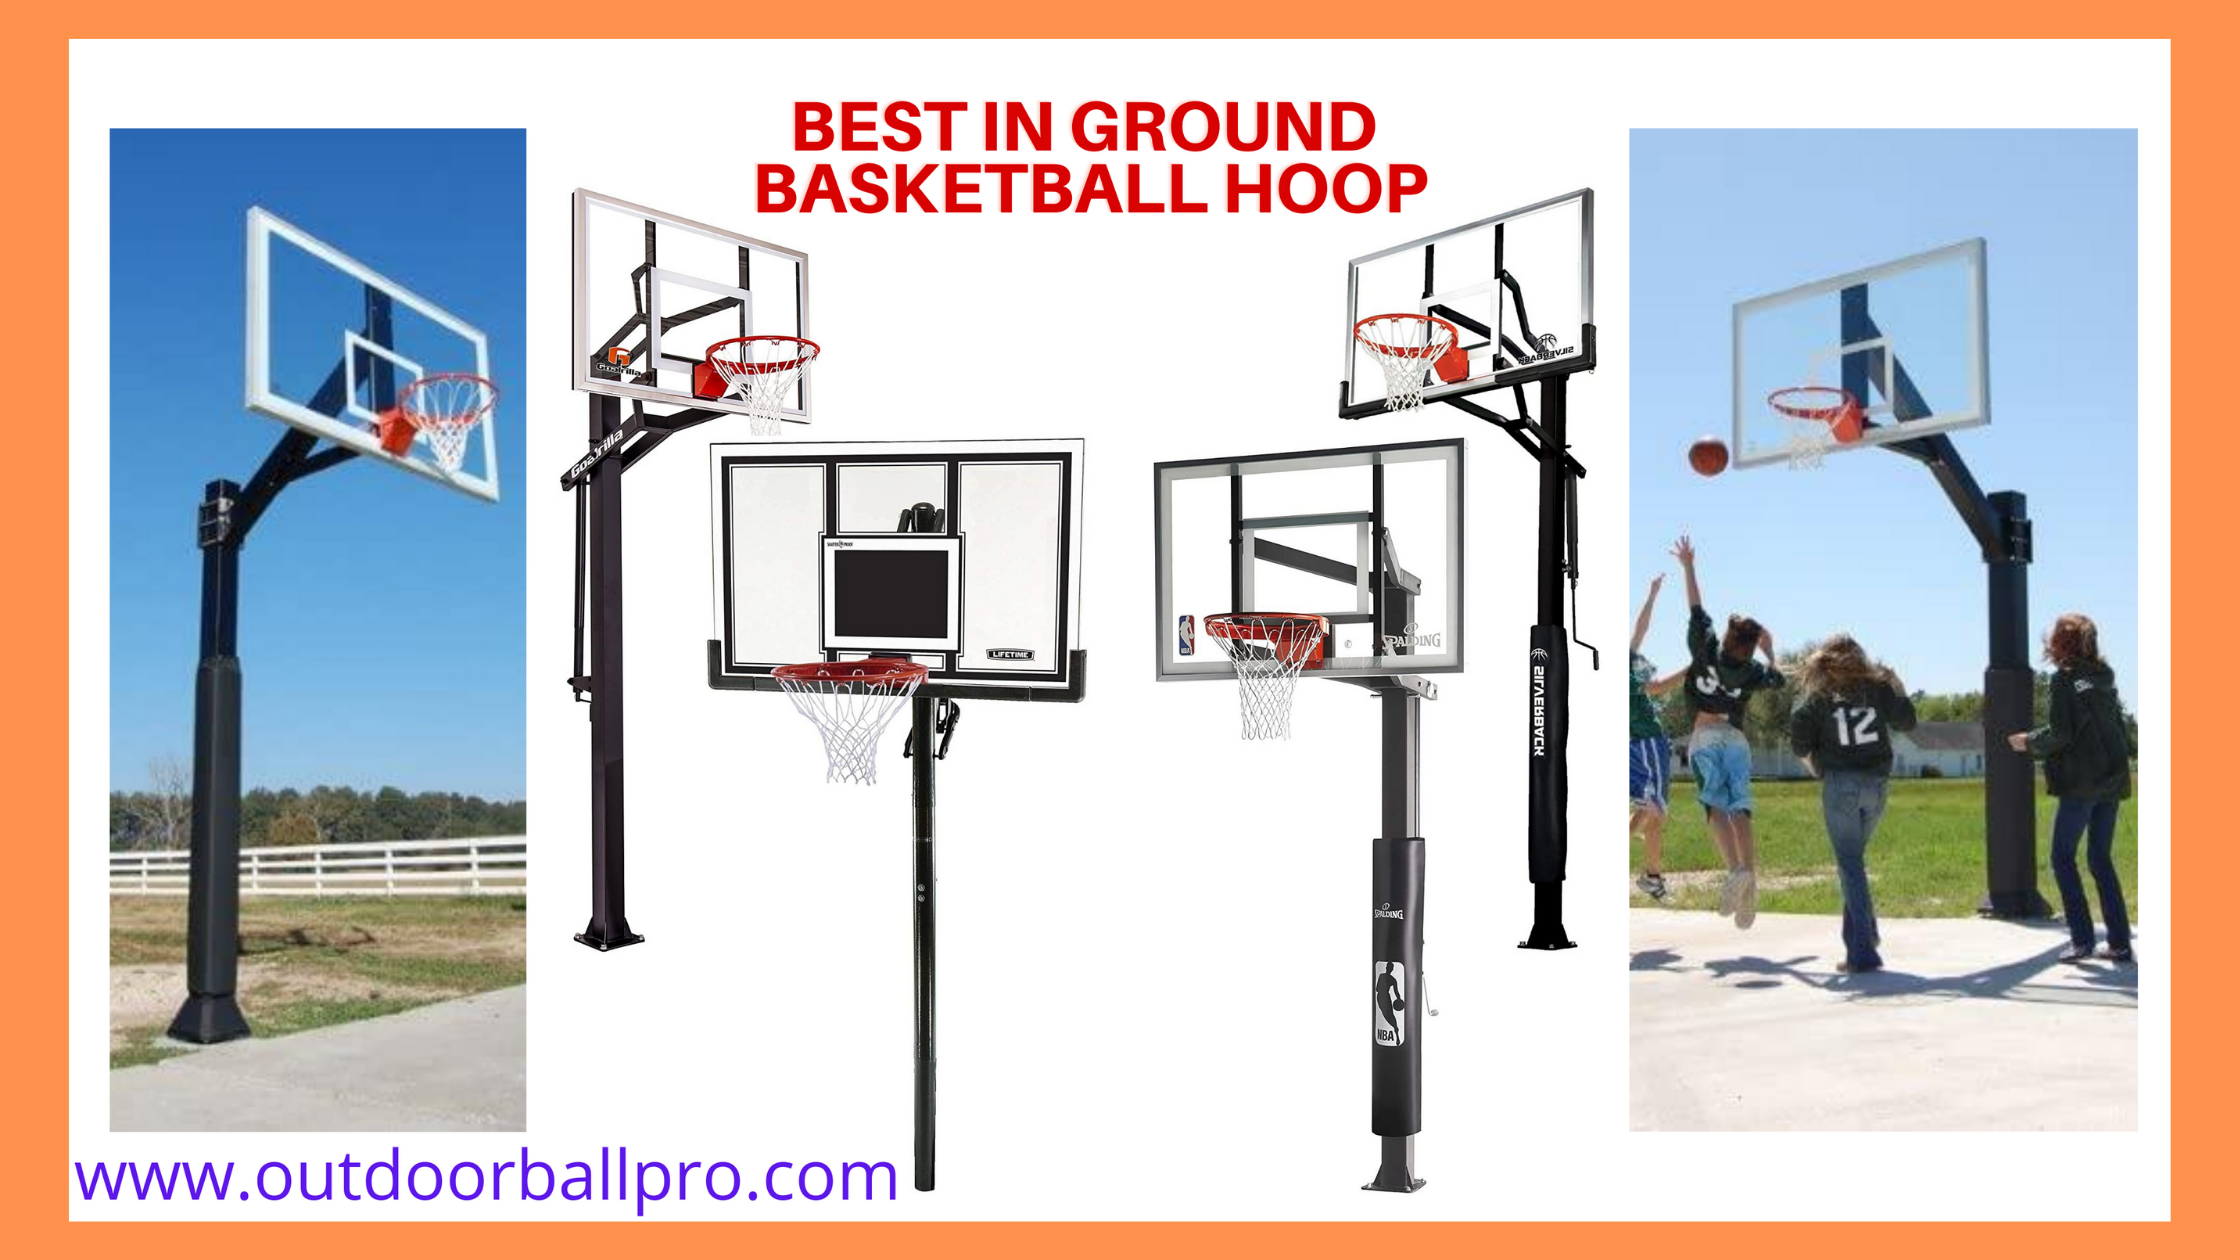 Best In Ground Basketball Hoop 2021, How Much Does It Cost To Install An In Ground Basketball Hoop